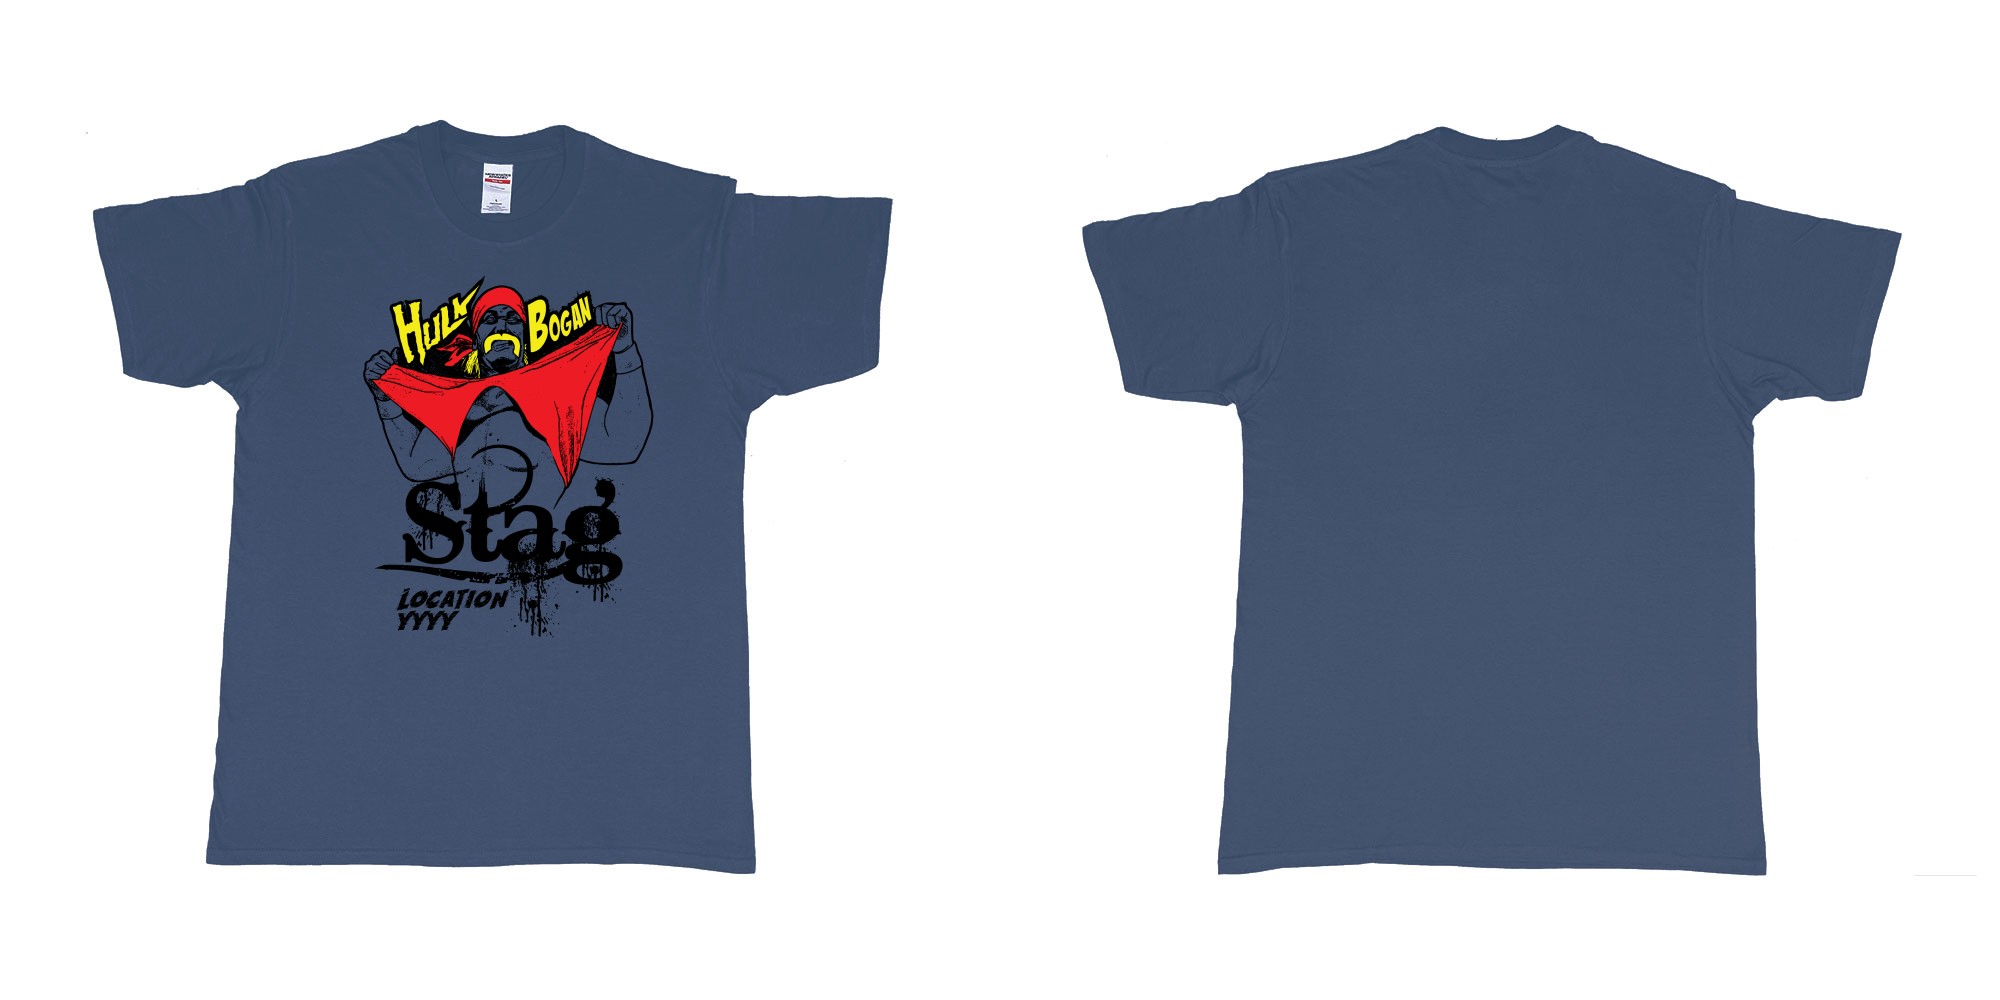 Custom tshirt design hulk hogan bogan in fabric color navy choice your own text made in Bali by The Pirate Way